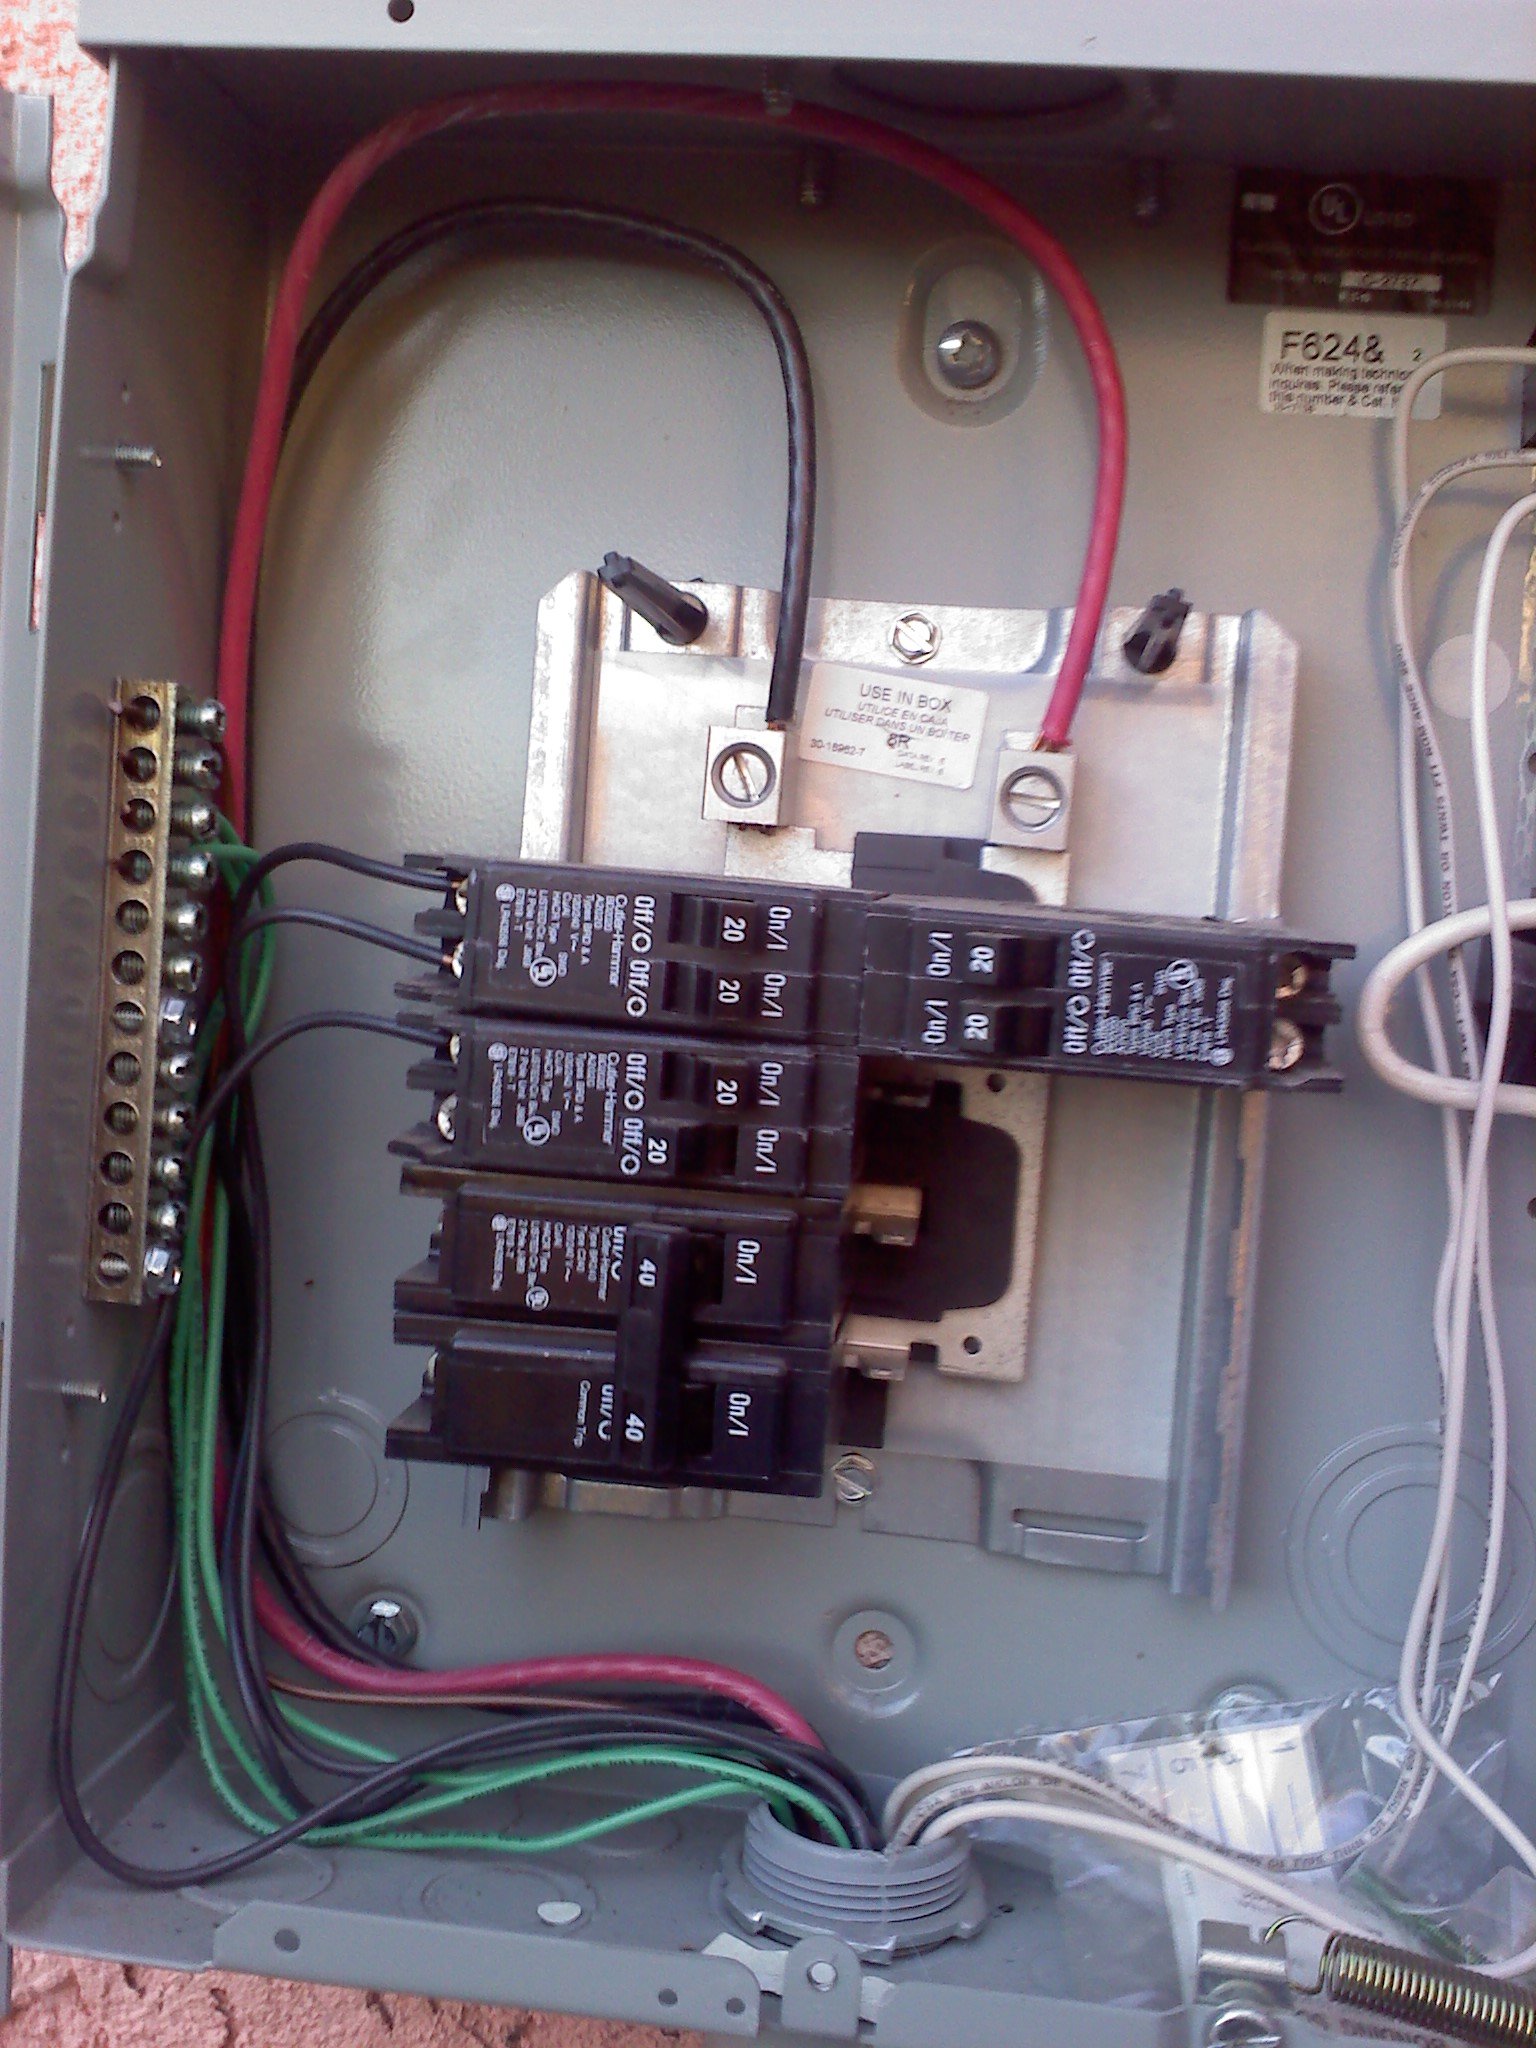 Wiring Electrical Sub Panels And Panels | Wiring Diagram - Electrical Sub Panel Wiring Diagram